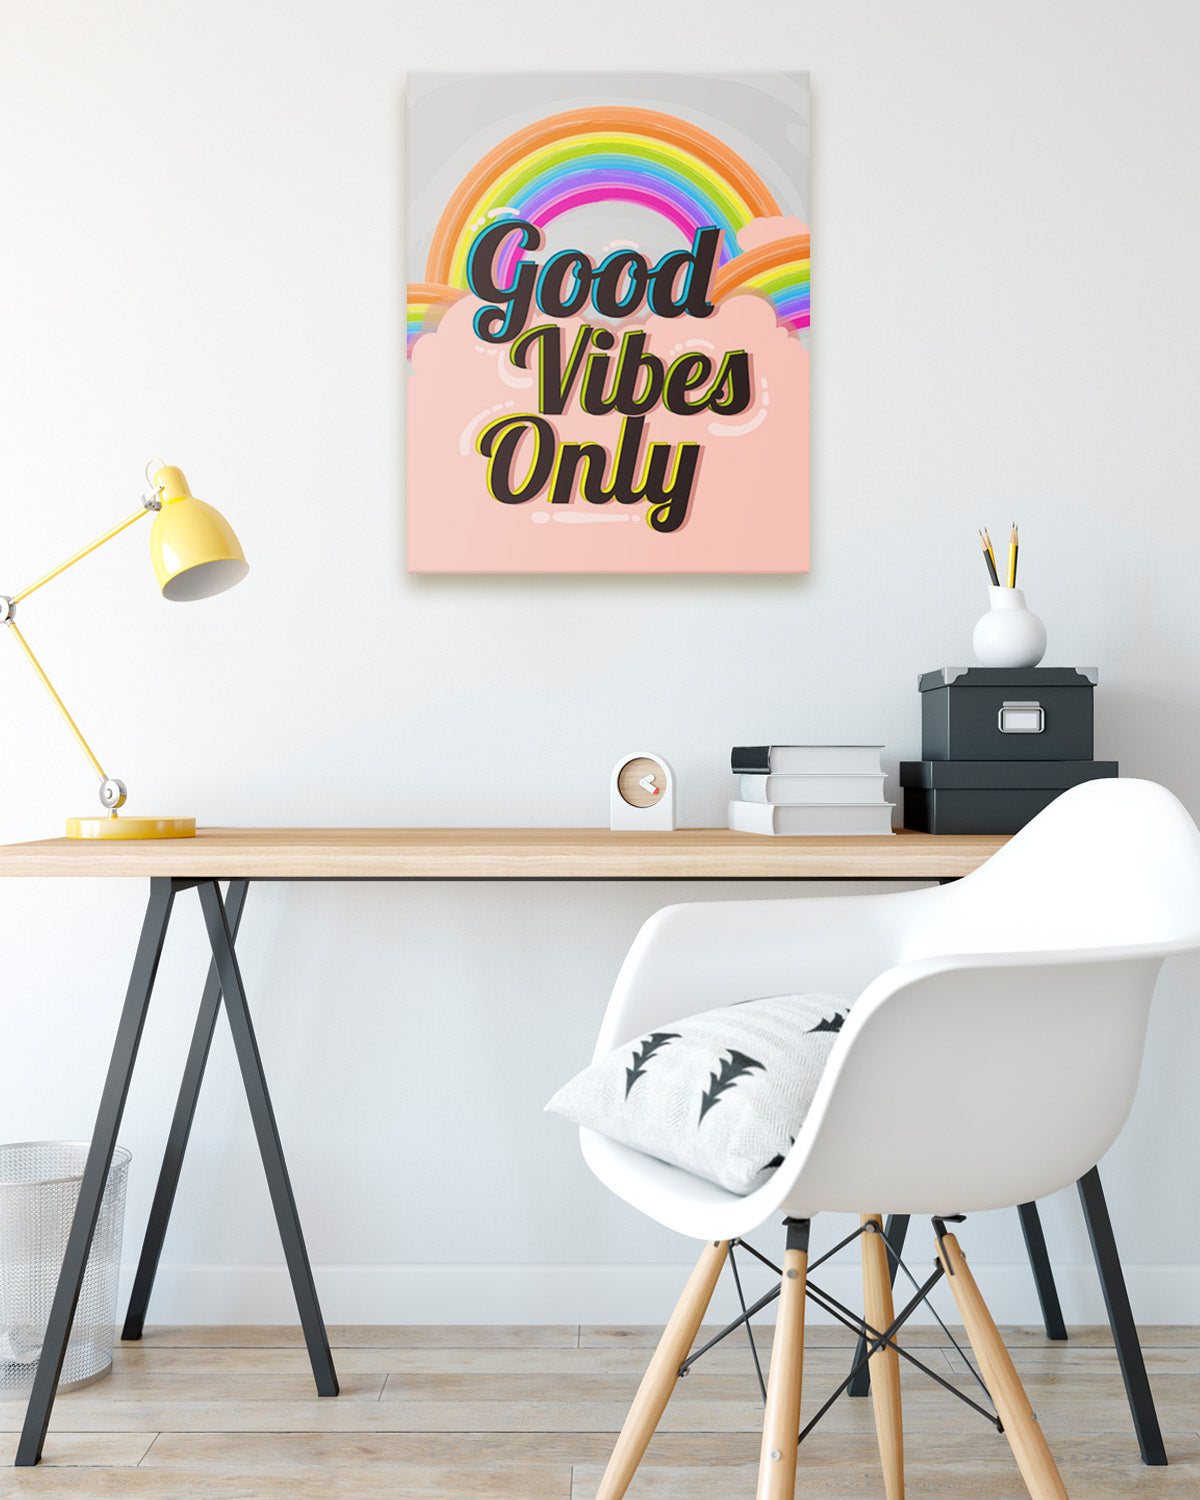 Good Vibes Only Wall Art Decor Print - unframed artwork printed on canvas